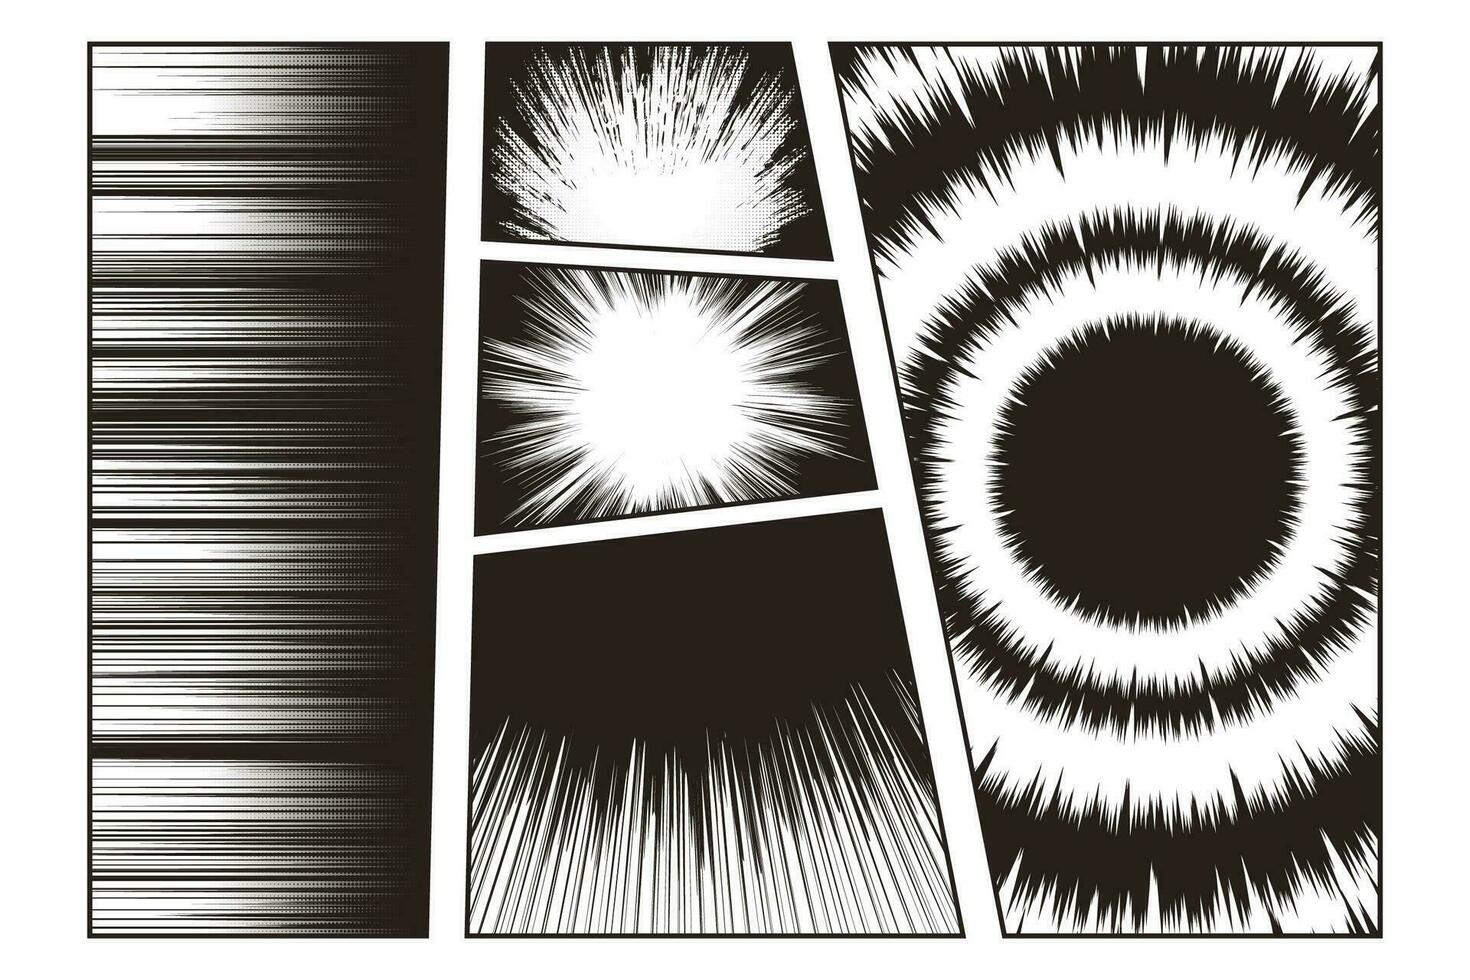 Manga speed line and radial effect for comic scene vector